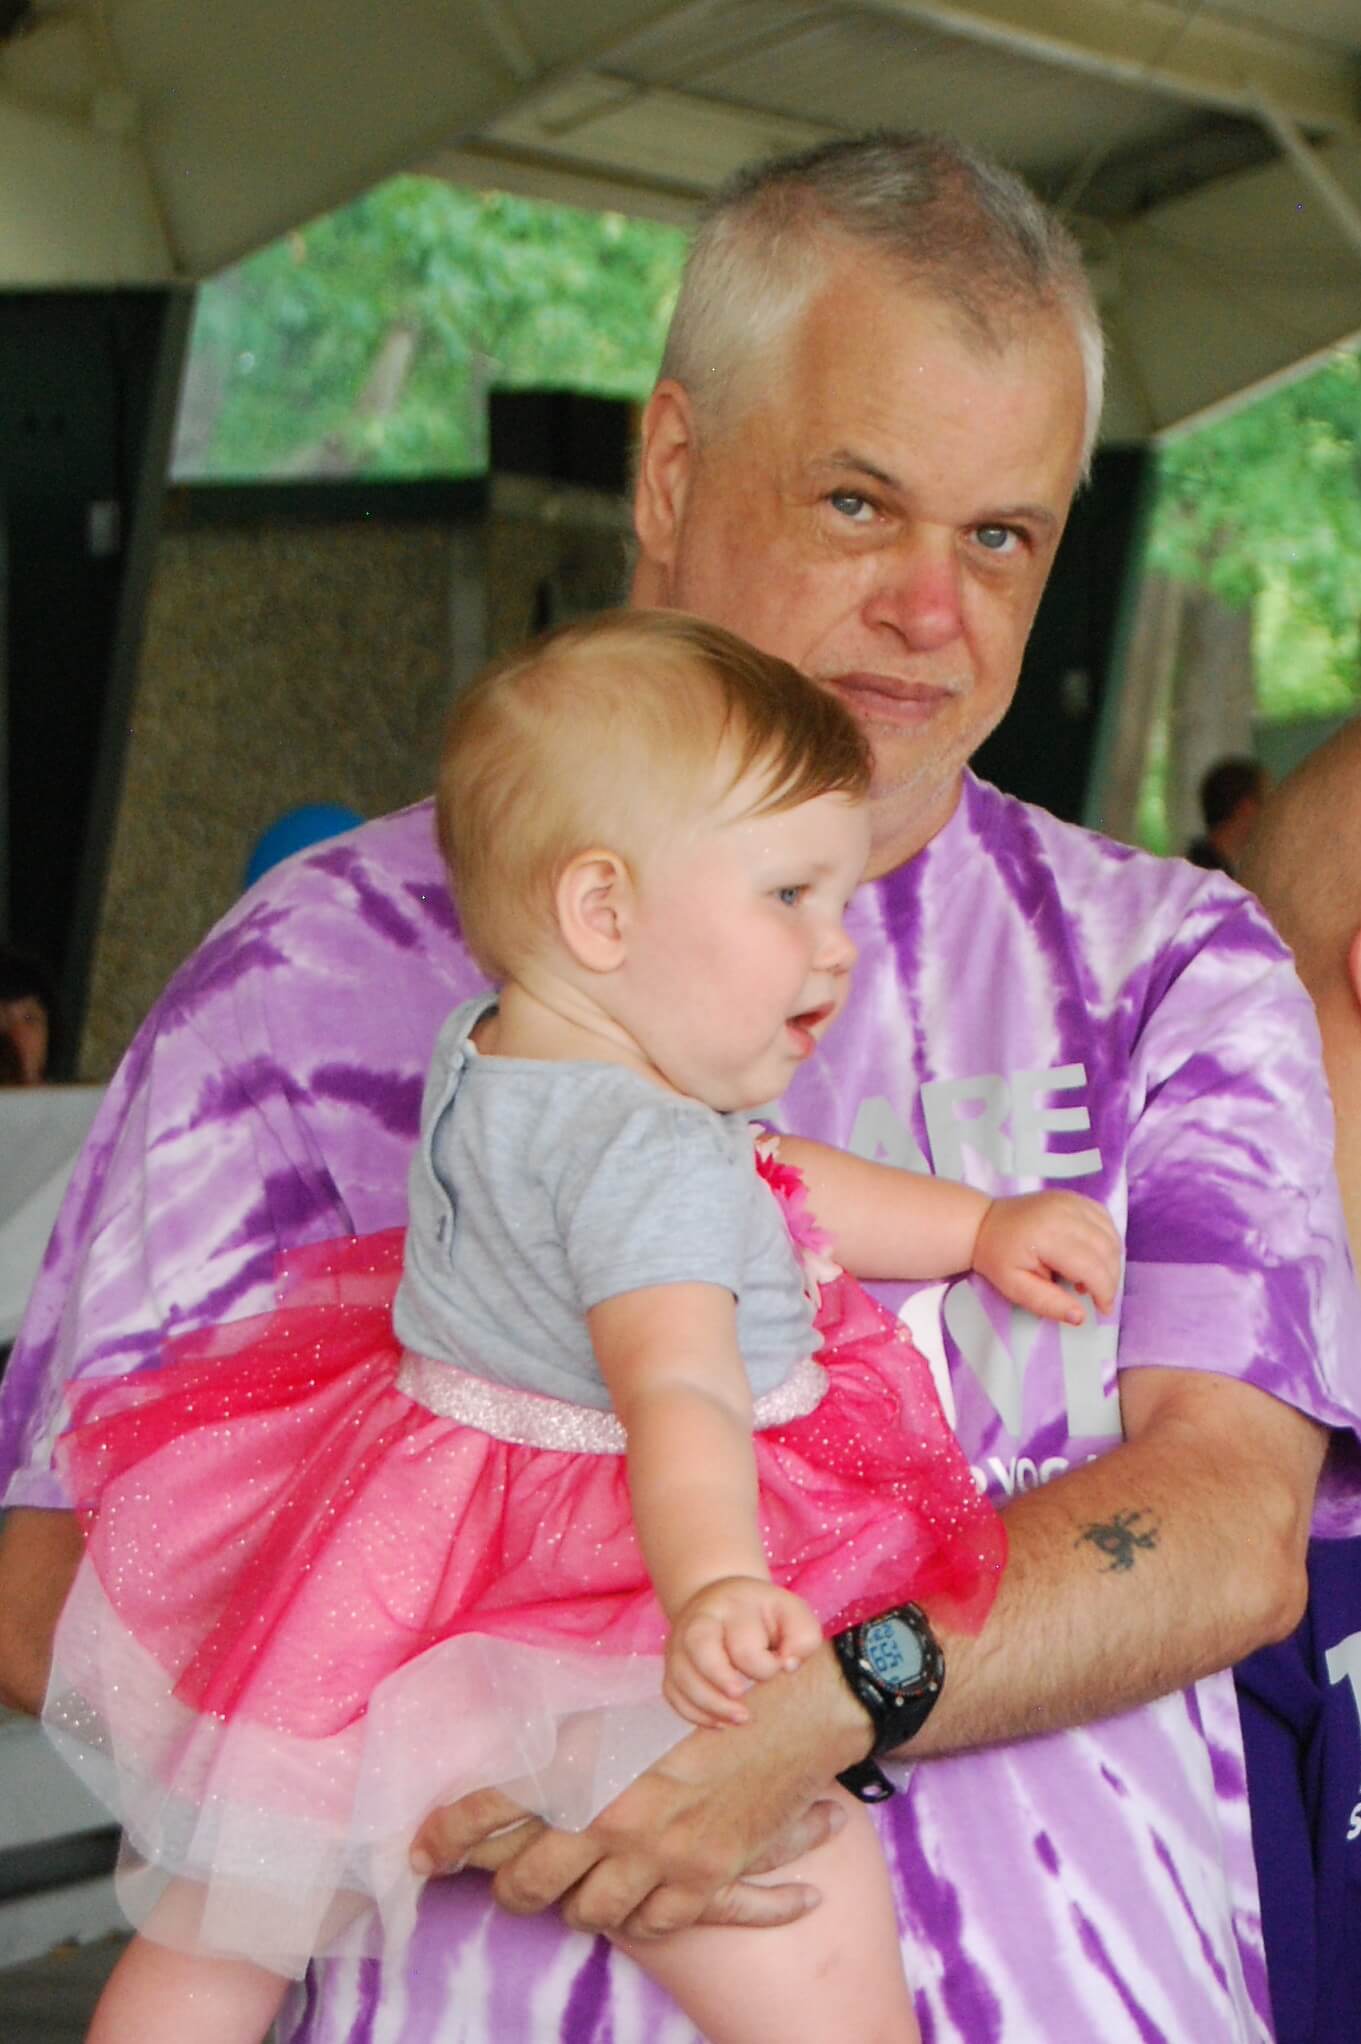 Thrive participant holding baby at FunFest event